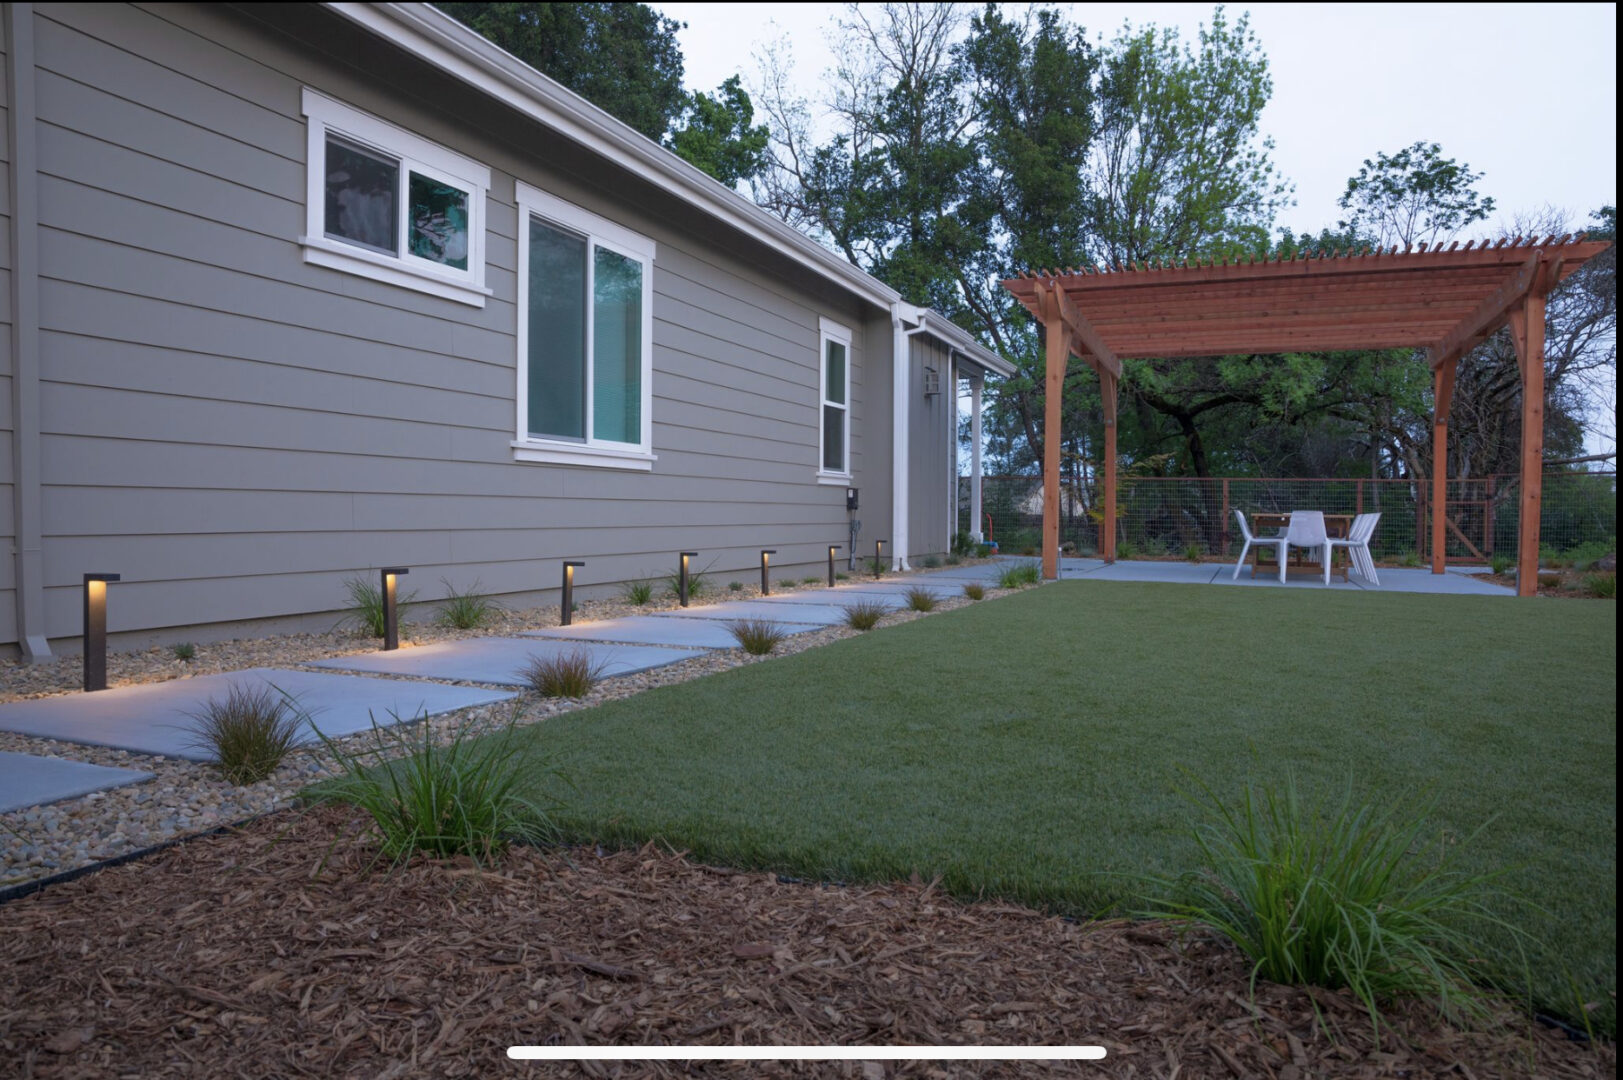 Artificial grass, path light, tiles, outdoor table set, landscaping by Guys Yard Design in Sonoma, CA